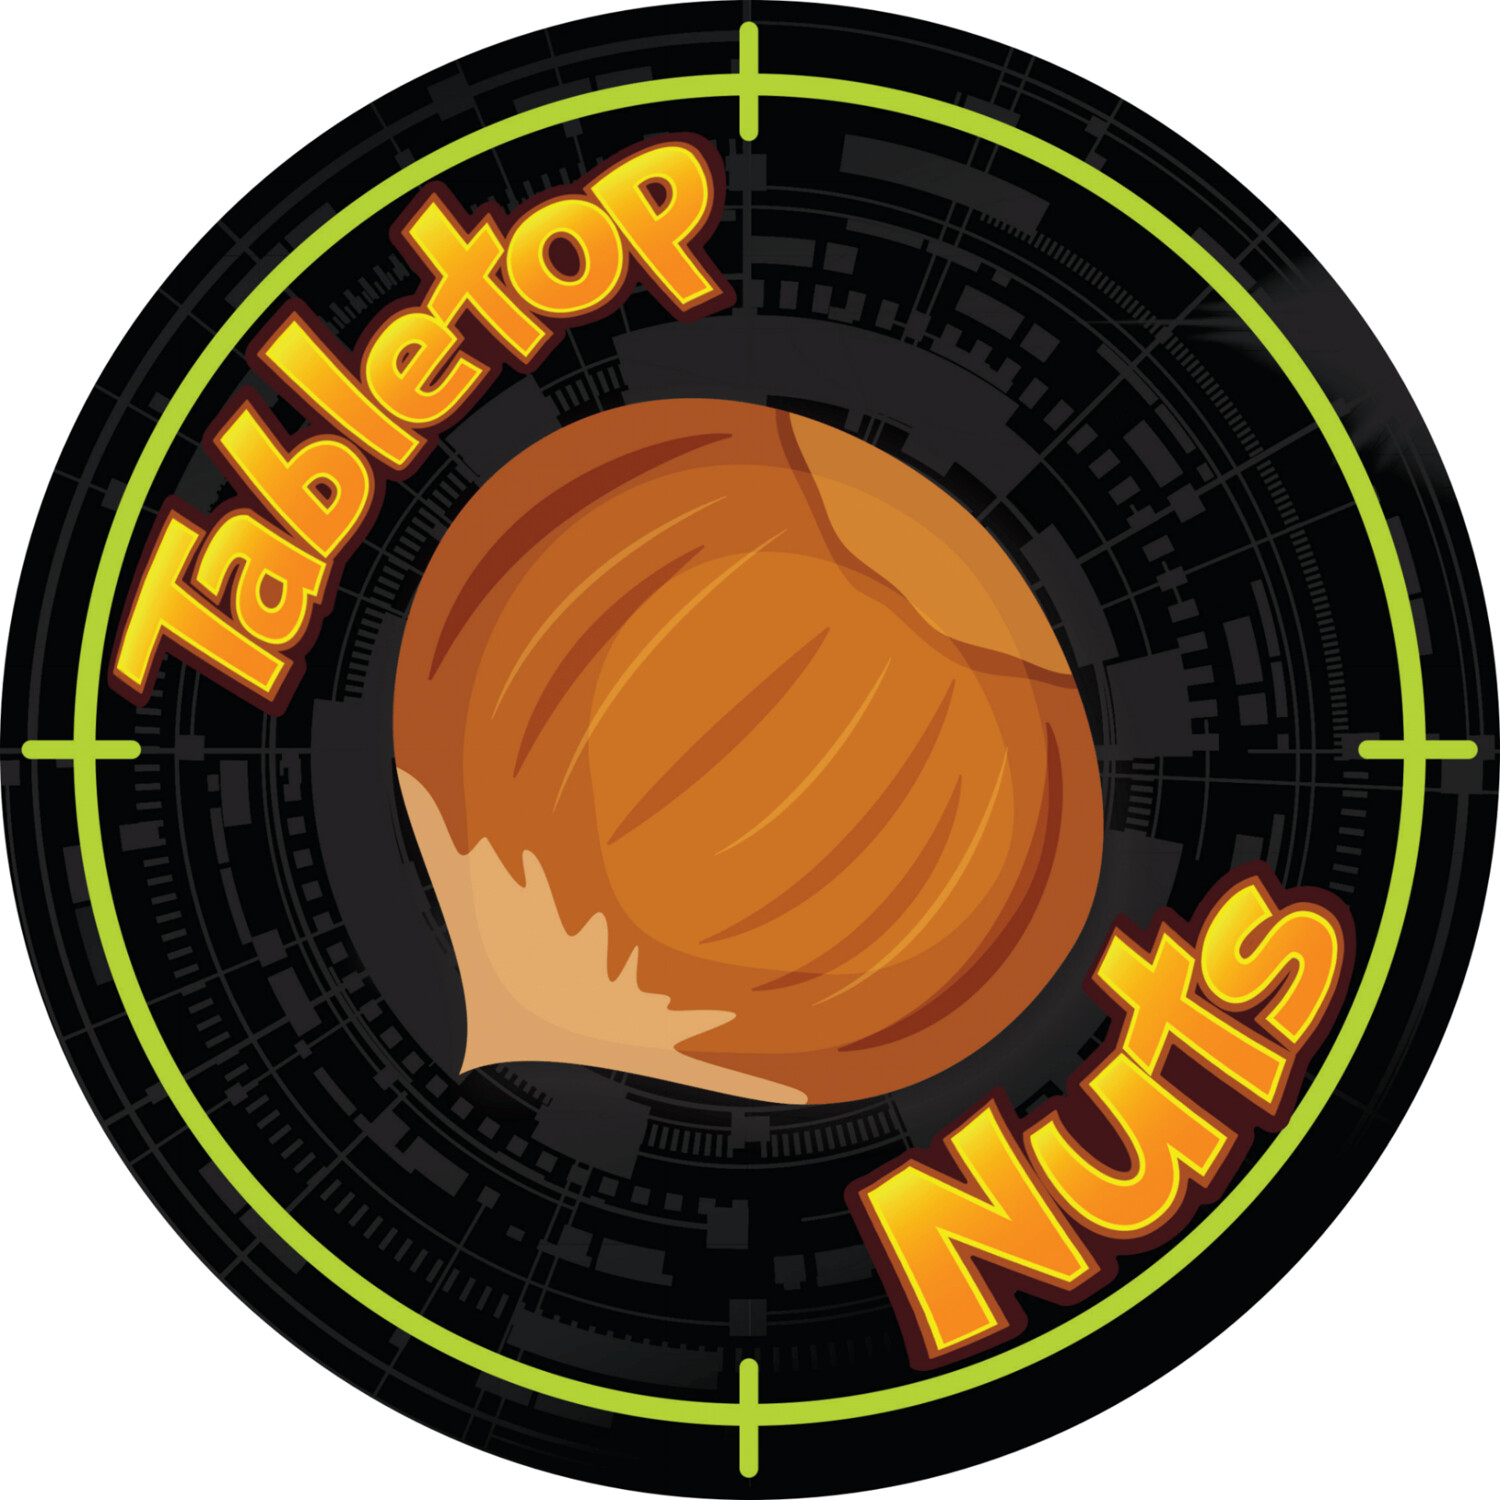 "Table top Nuts" Gabarits d'objectifs / target templates